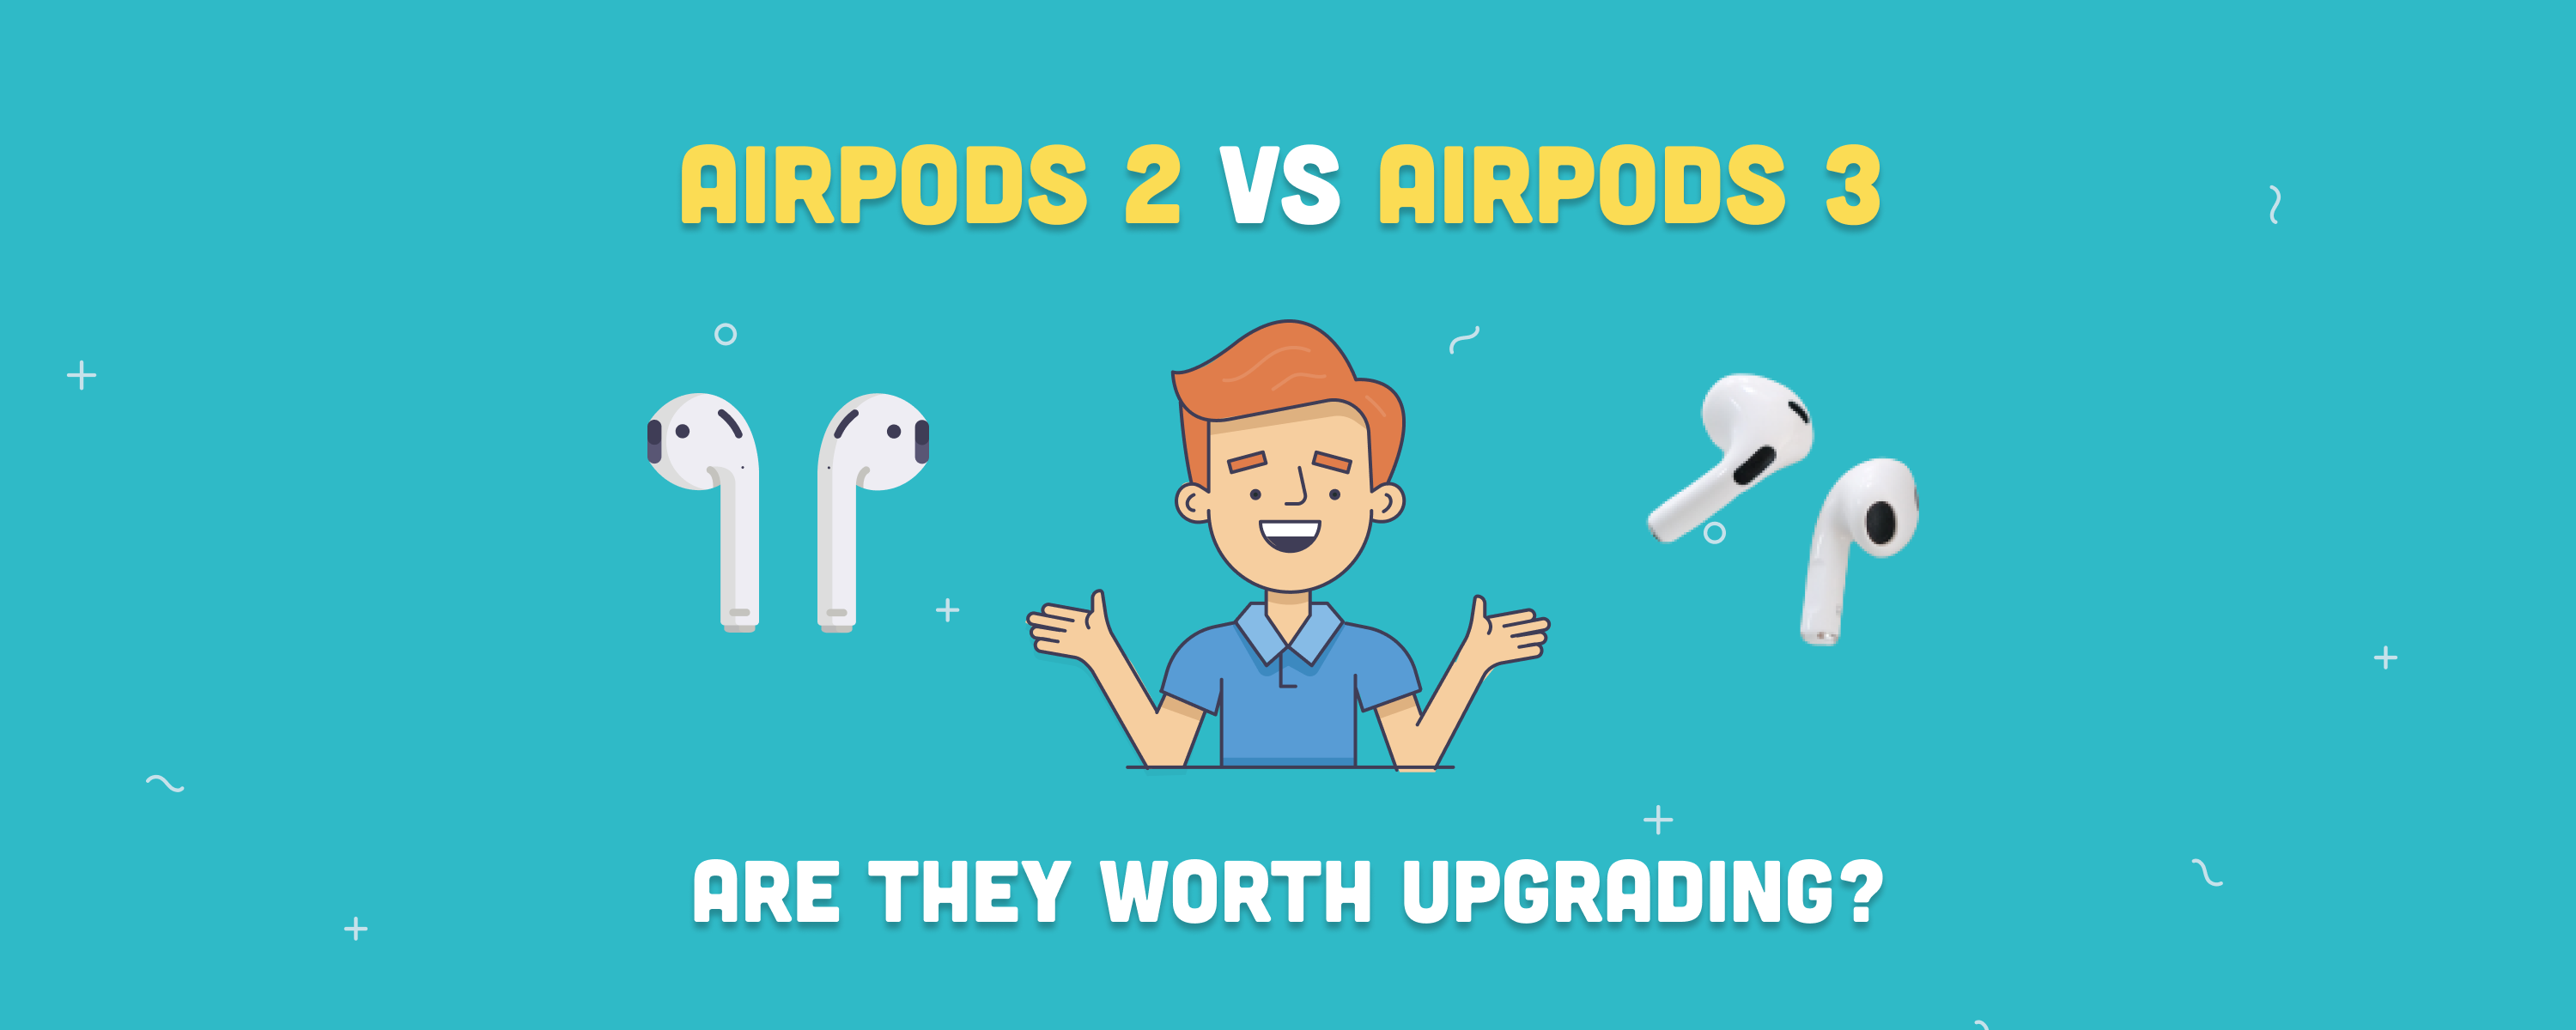 AirPods 2 vs. AirPods 3: Are They Worth Upgrading?